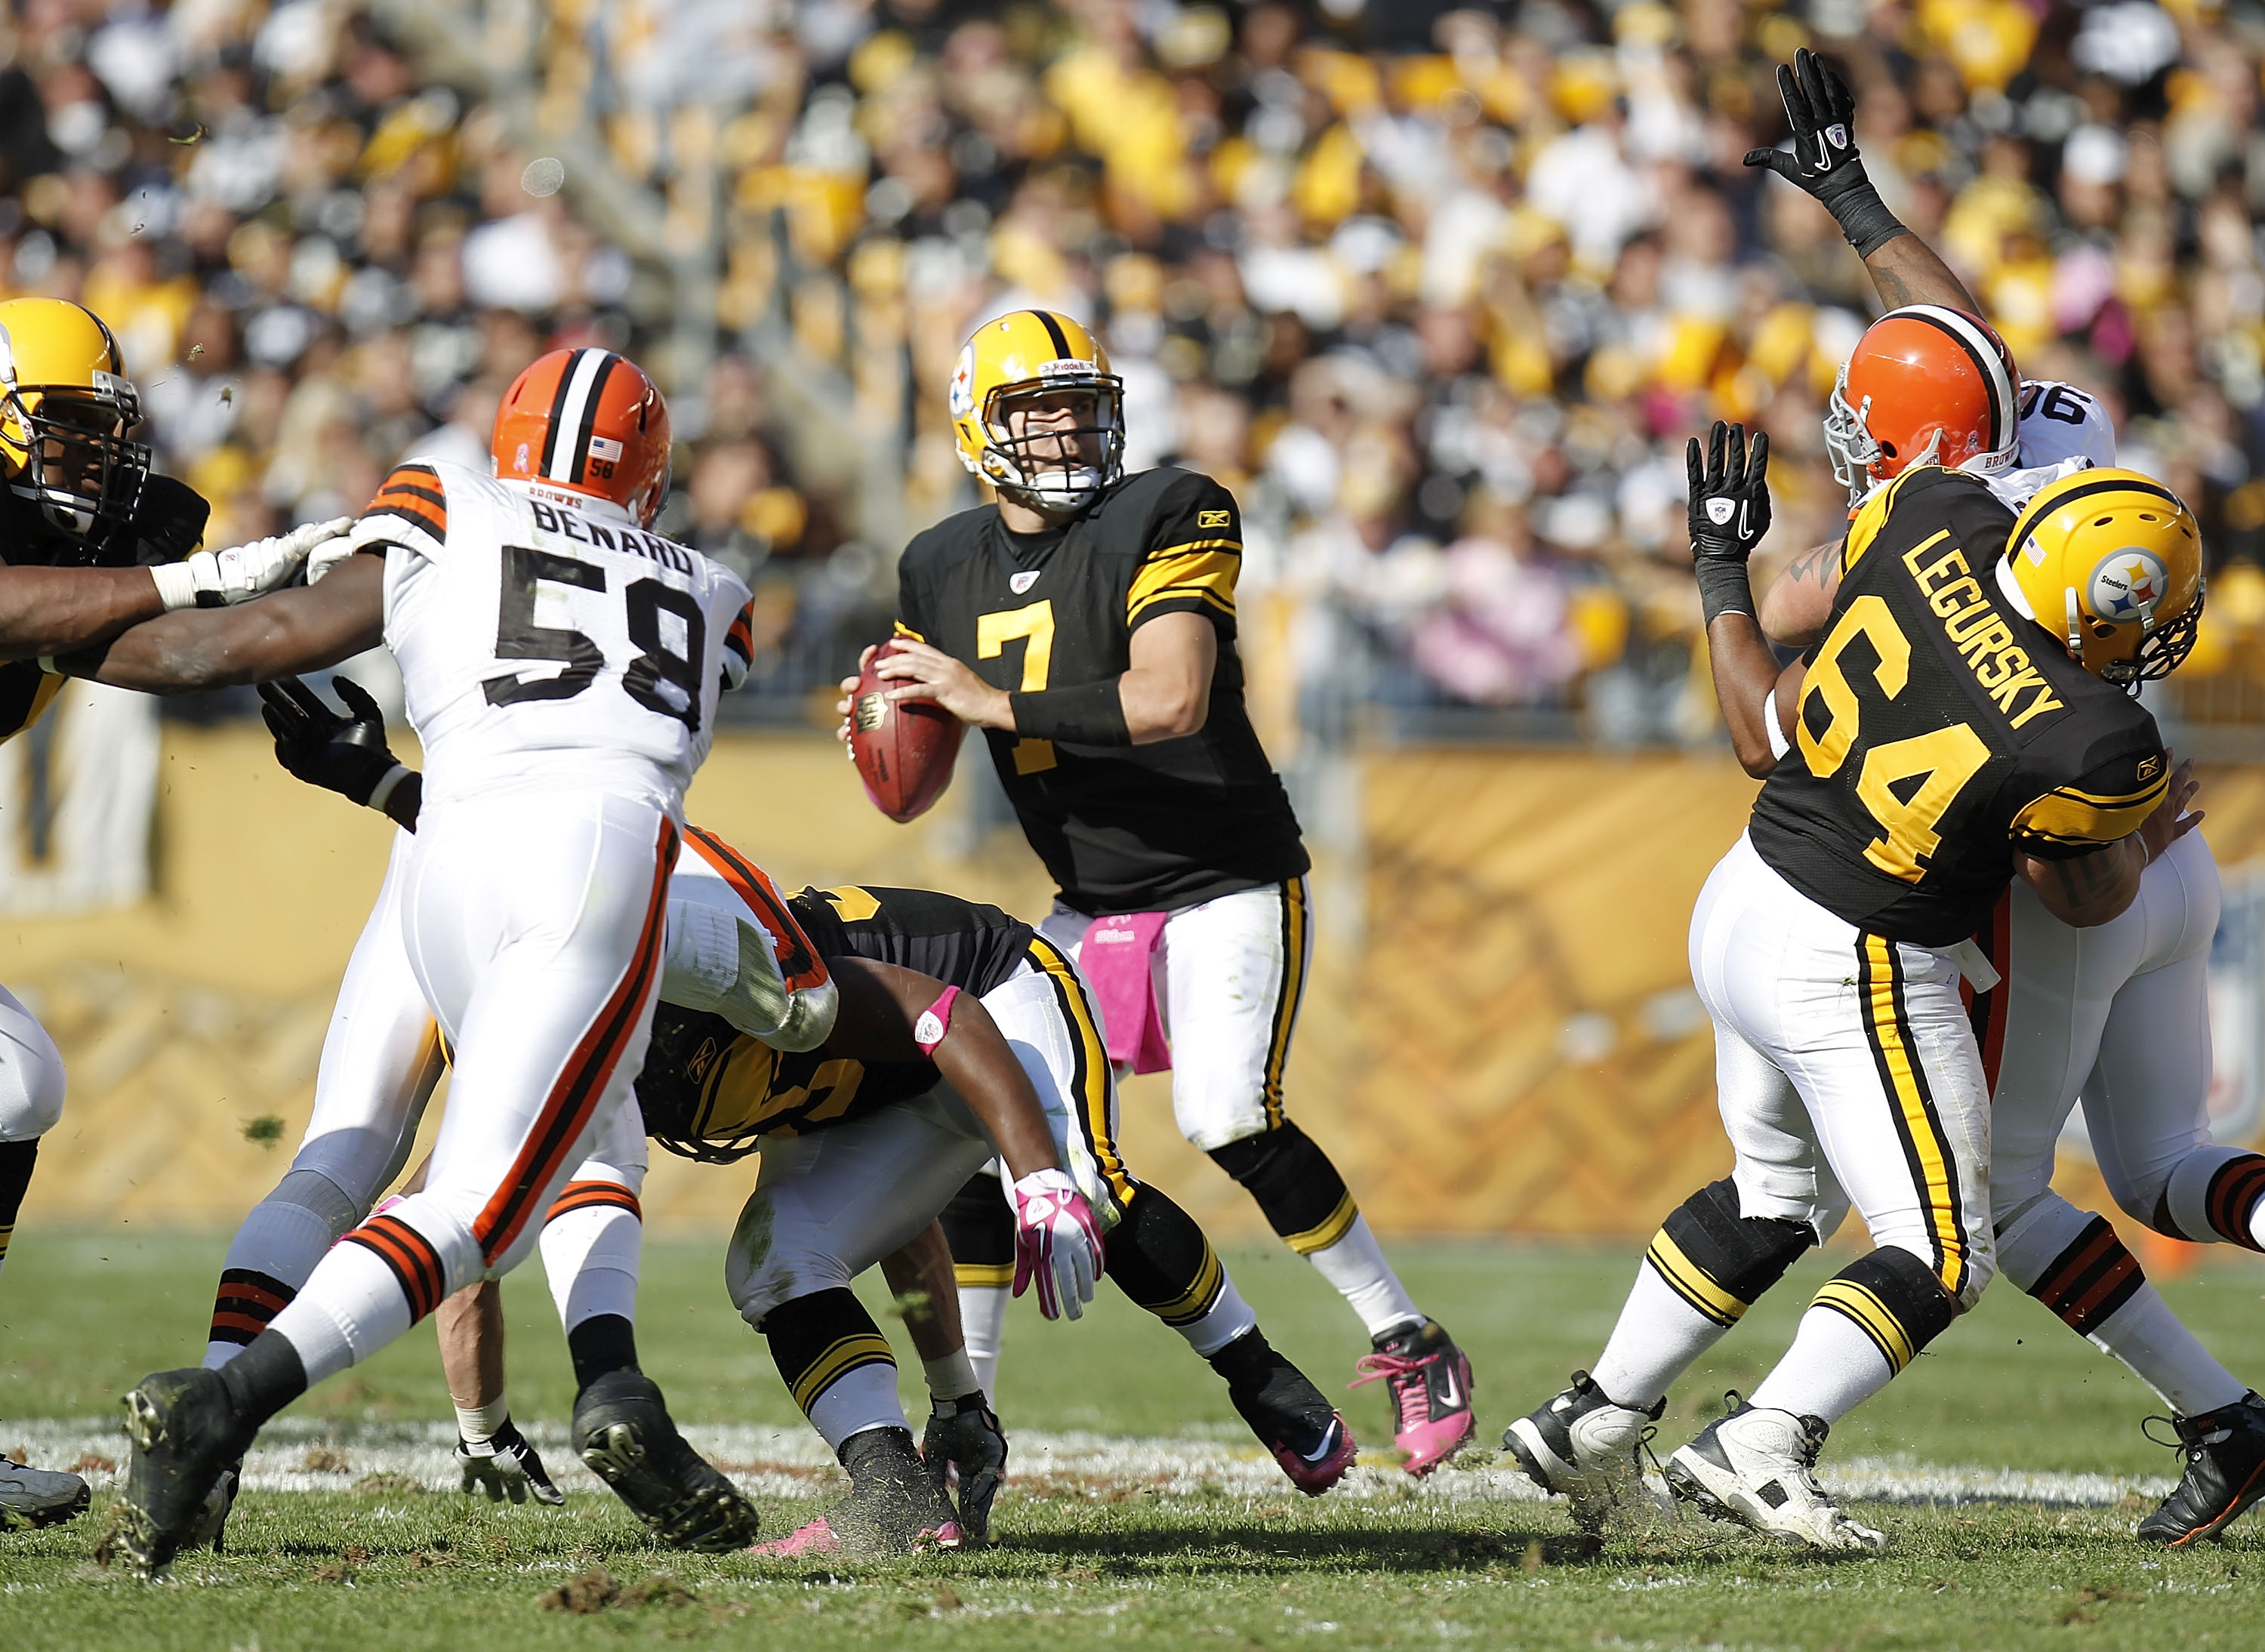 PITTSBURGH - OCTOBER 17:  Ben Roethlisberger #7 of the Pittsburgh Steelers thows a fourth quarter pass while playing the Cleveland Browns on October 17, 2010 at Heinz Field in Pittsburgh, Pennsylvania. Pittsburgh won the game 28-10. (Photo by Gregory Sham